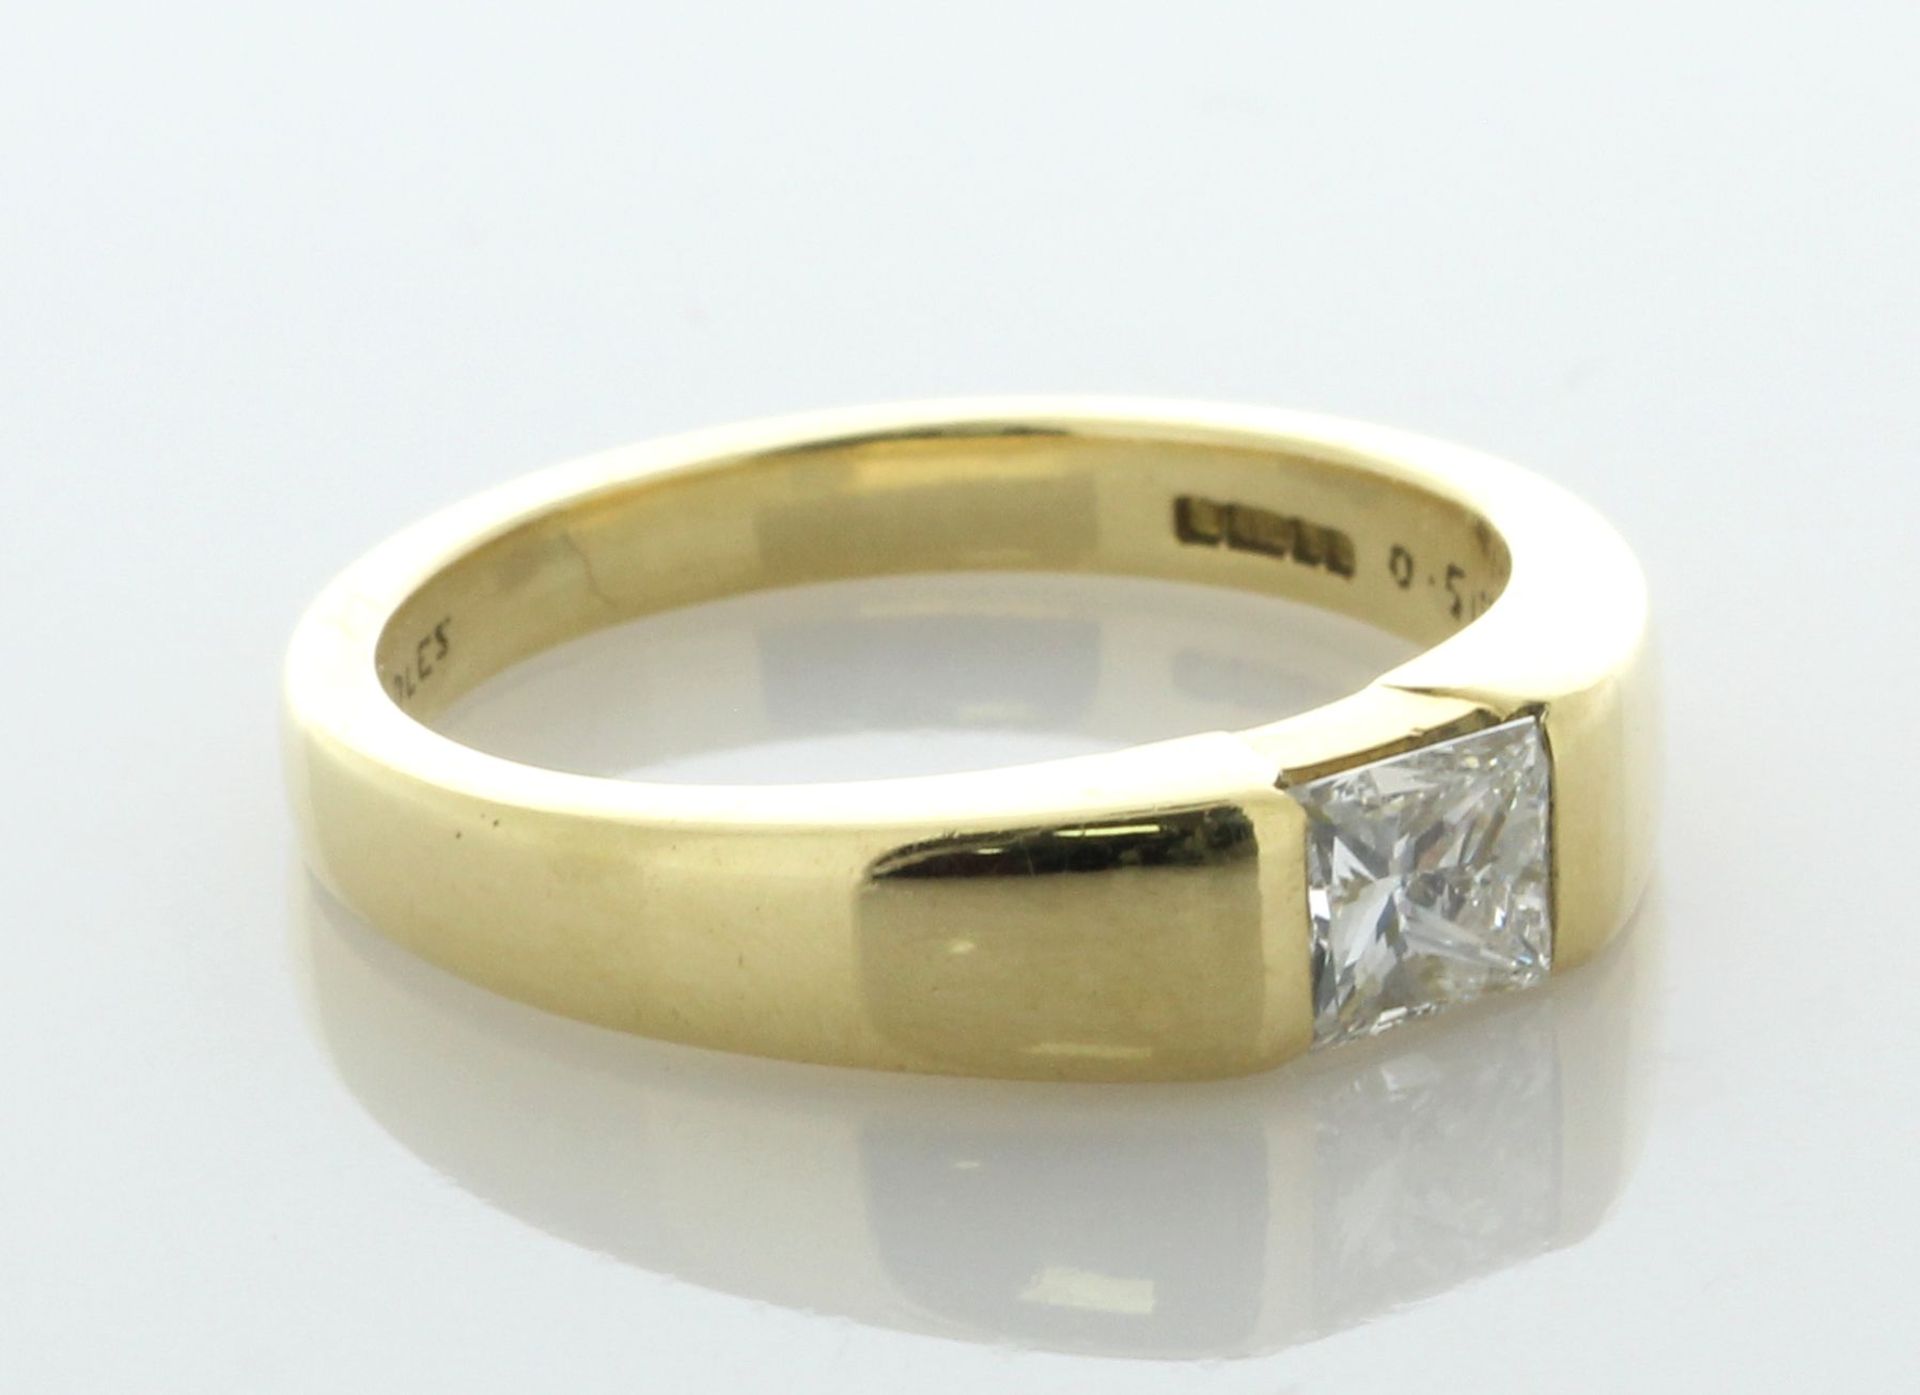 18ct Yellow Gold BOODLES Princess Cut Diamond Ring 0.51 Carats - Valued By AGI £5,100.00 - - Image 2 of 7